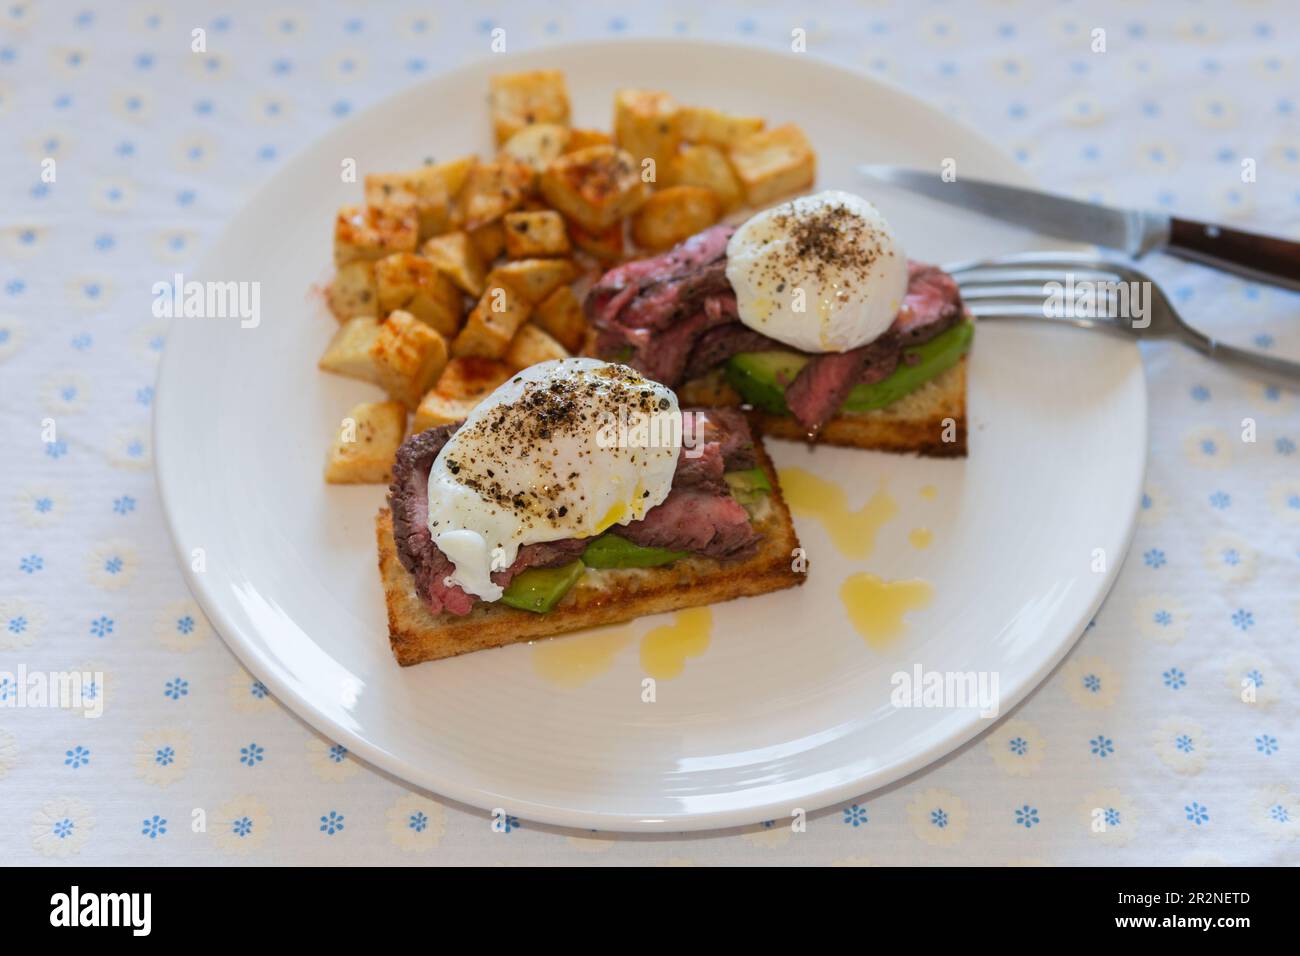 Steak benedict breakfast. Poached eggs, grilled steak and avocado on toast, with side of hash browned potatoes. Stock Photo